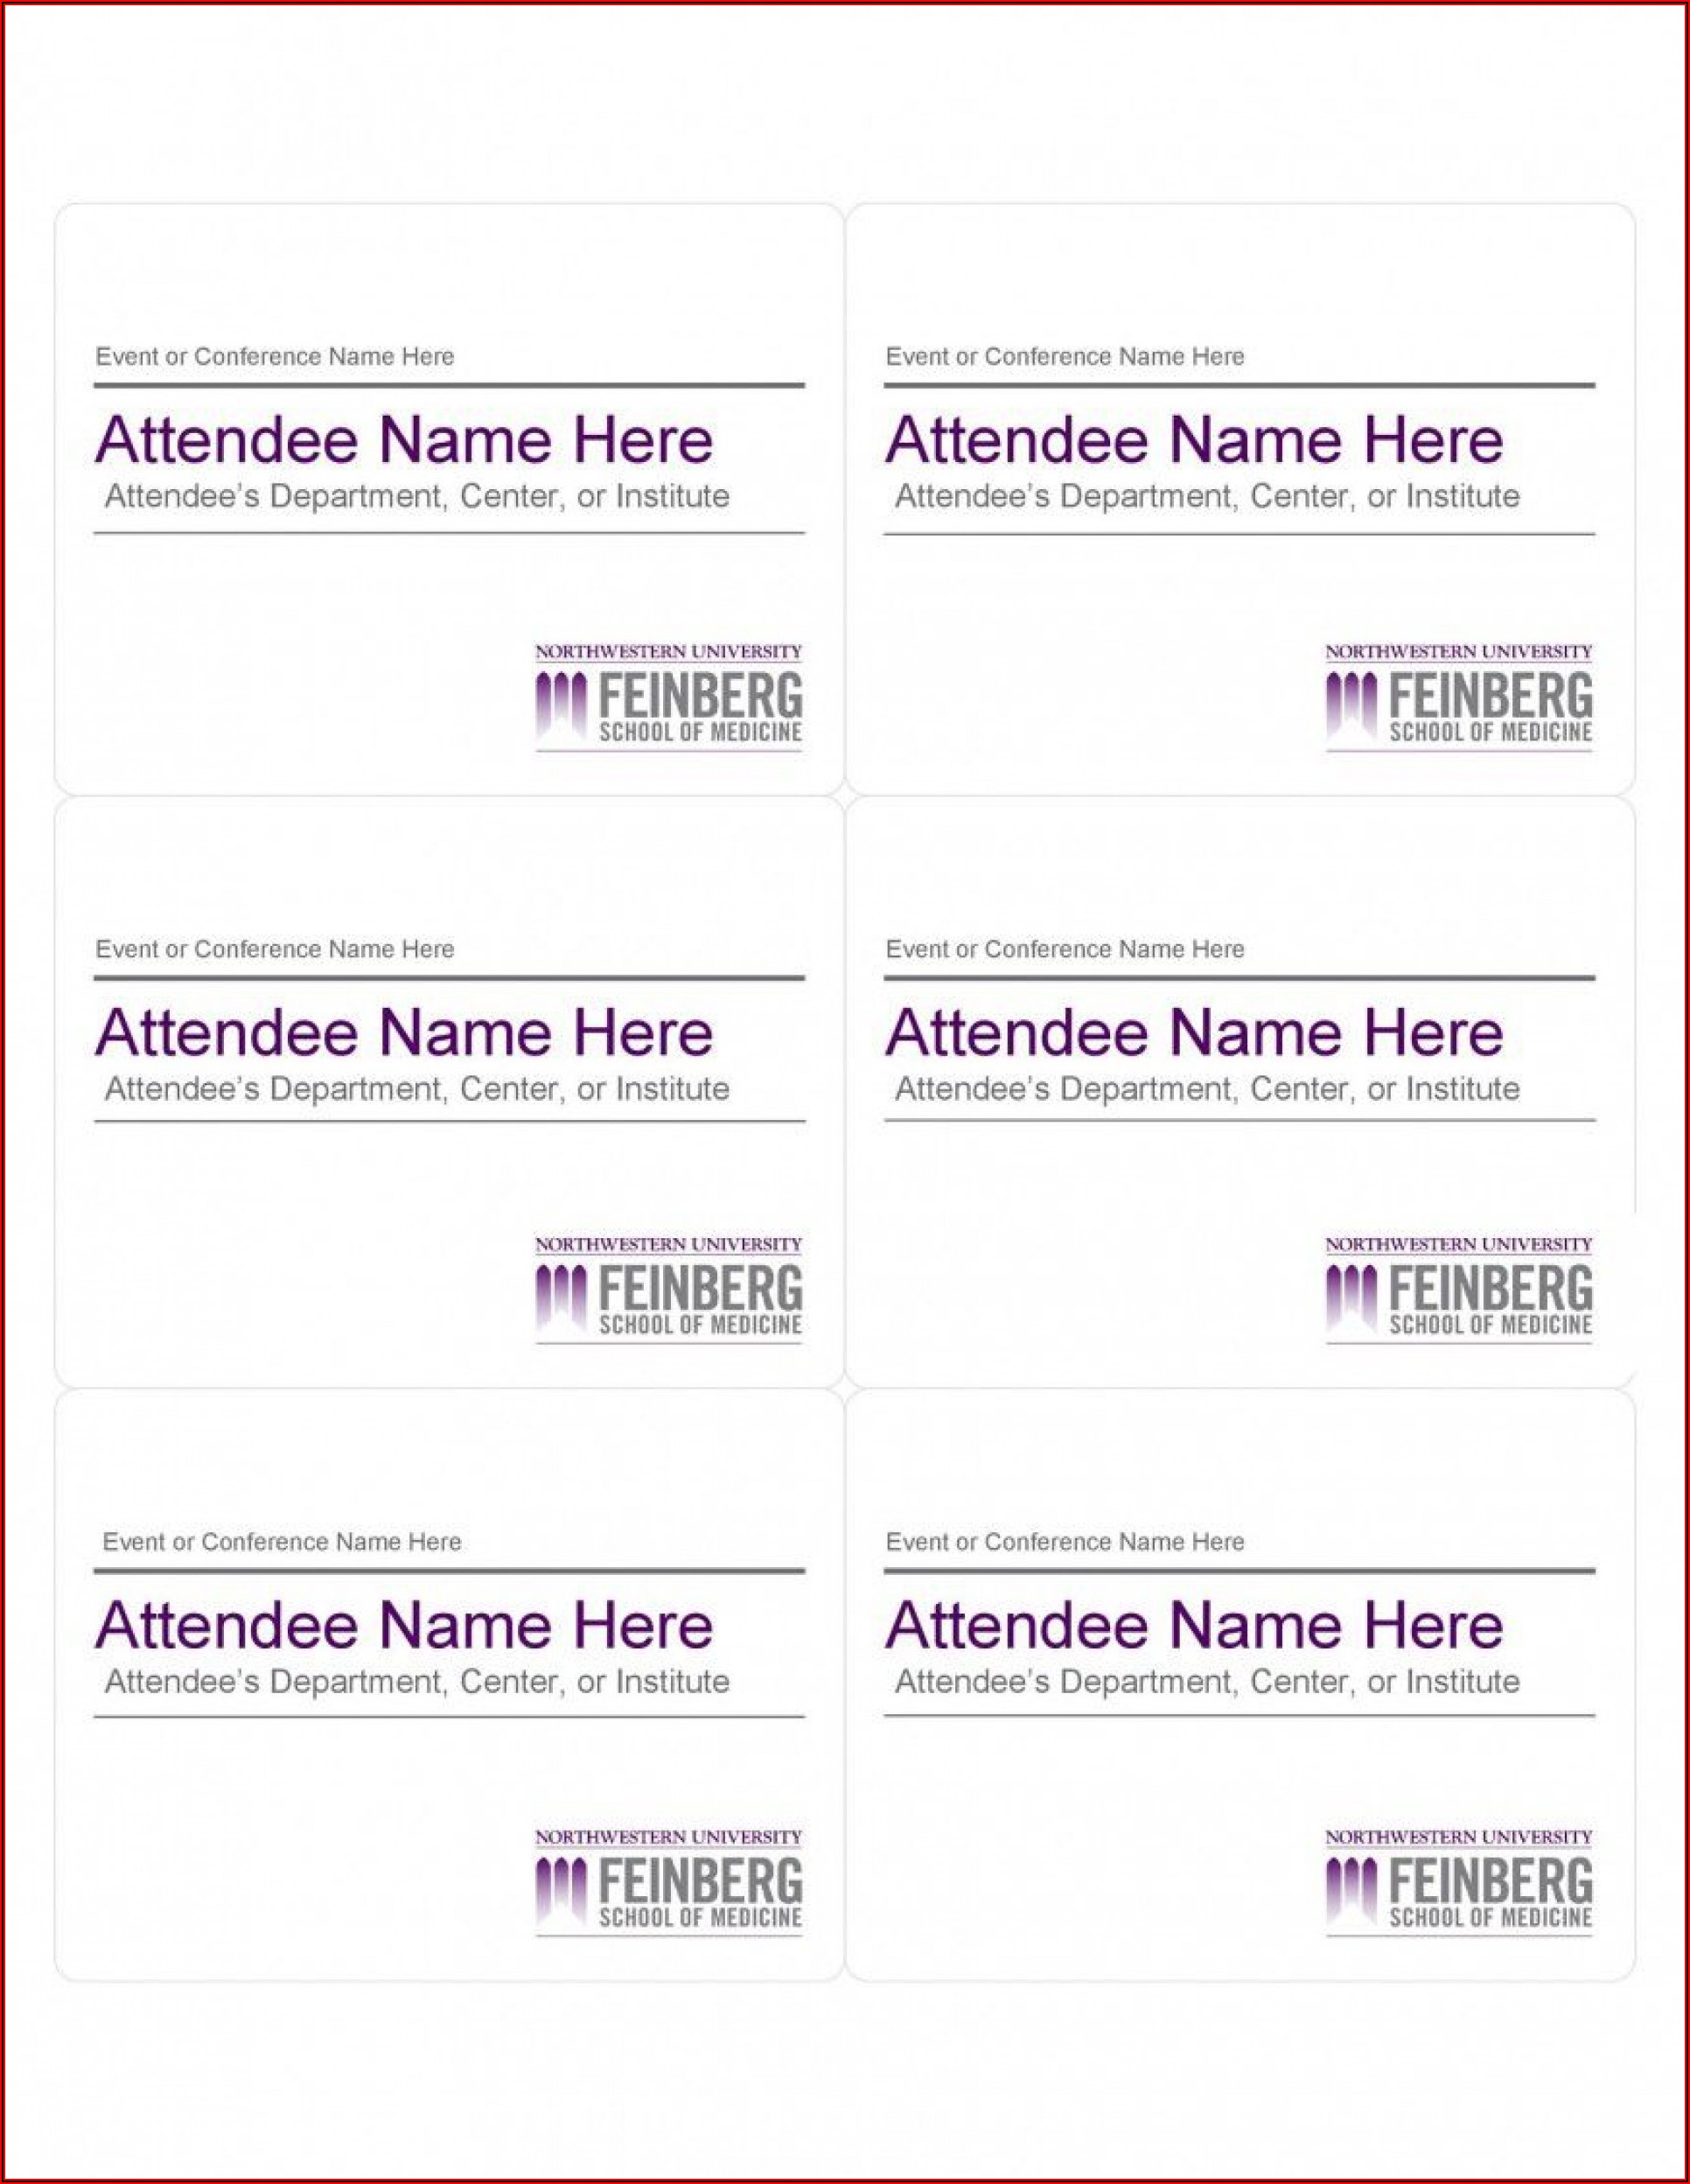 Avery Name Badge Templates 5392 Template 1 Resume Examples o7Y31zpo2B